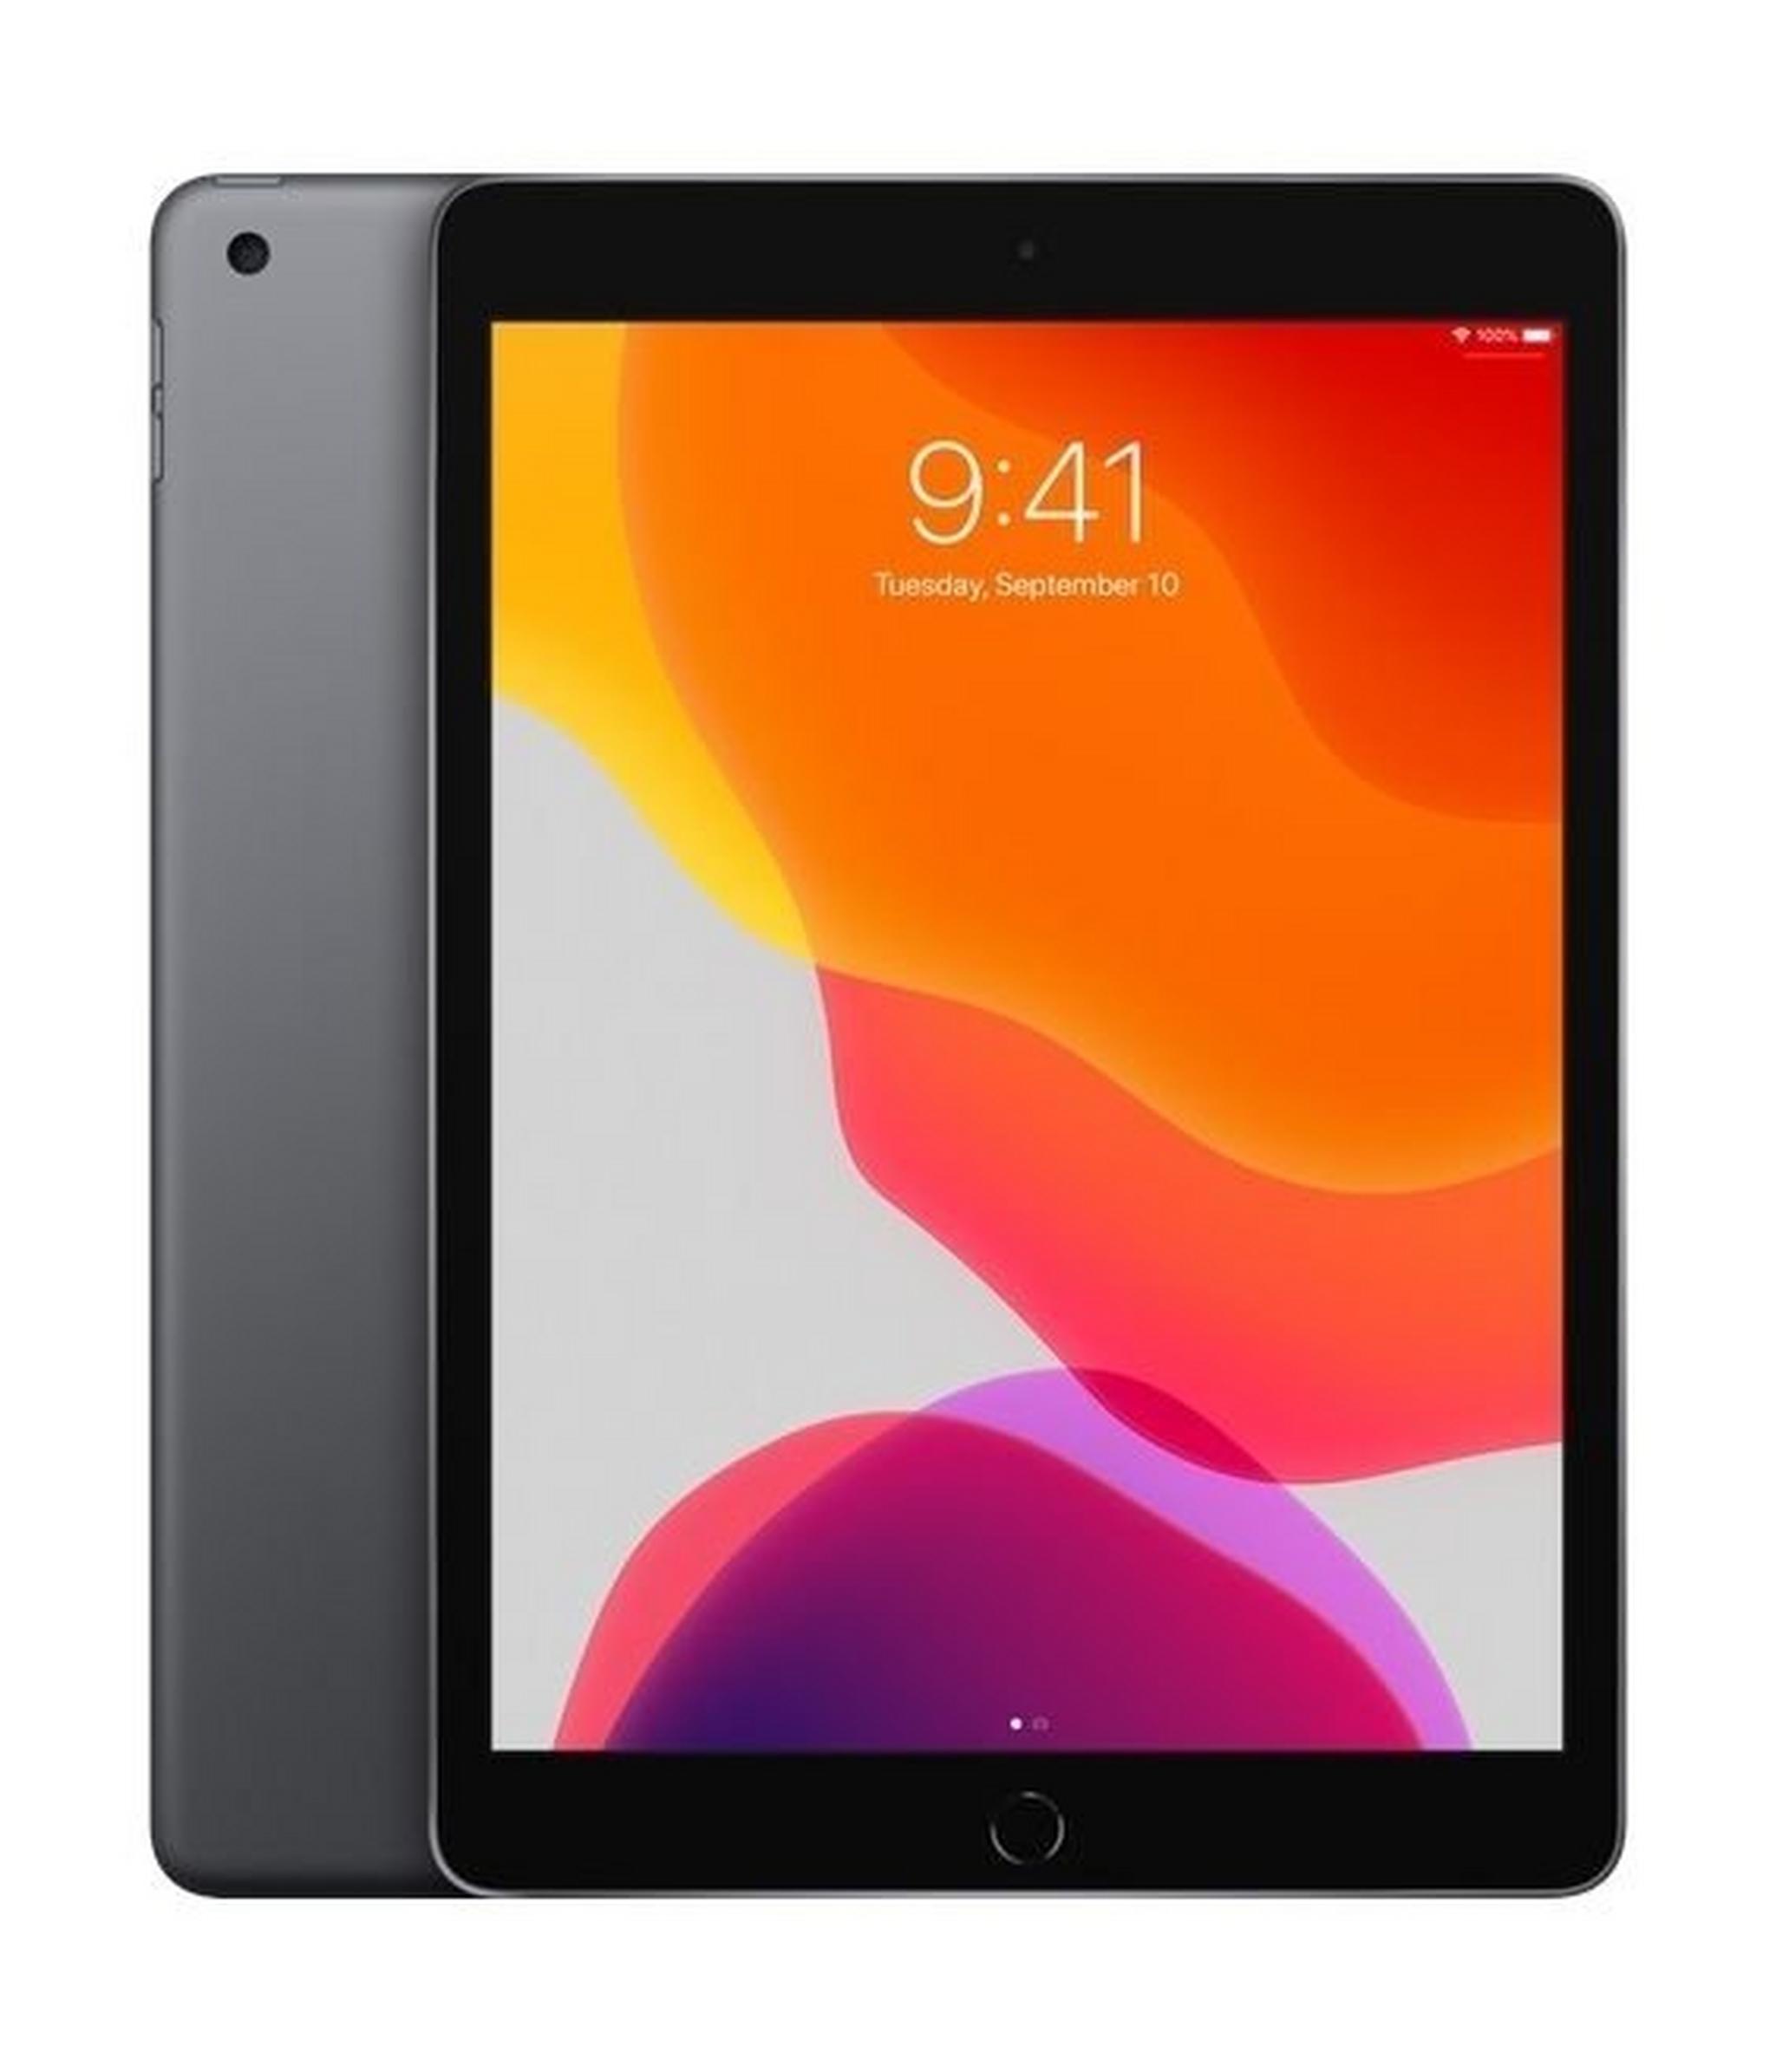 Apple iPad 7 10.2-inch 128GB Wi-Fi Only Tablet - Space Grey